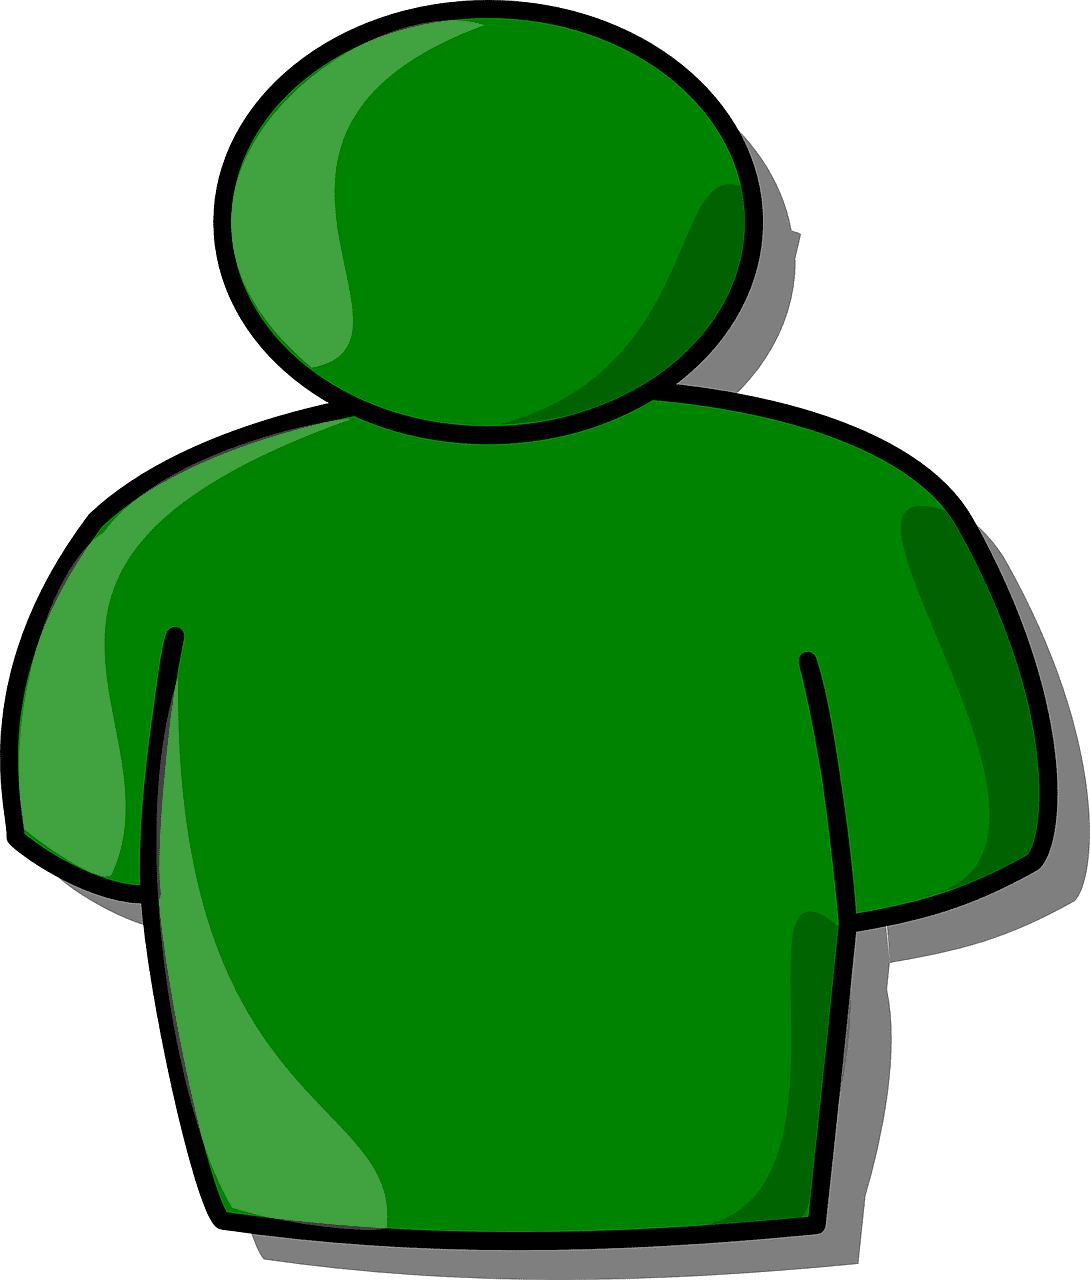 Body upper chest shoulders green image from clipart